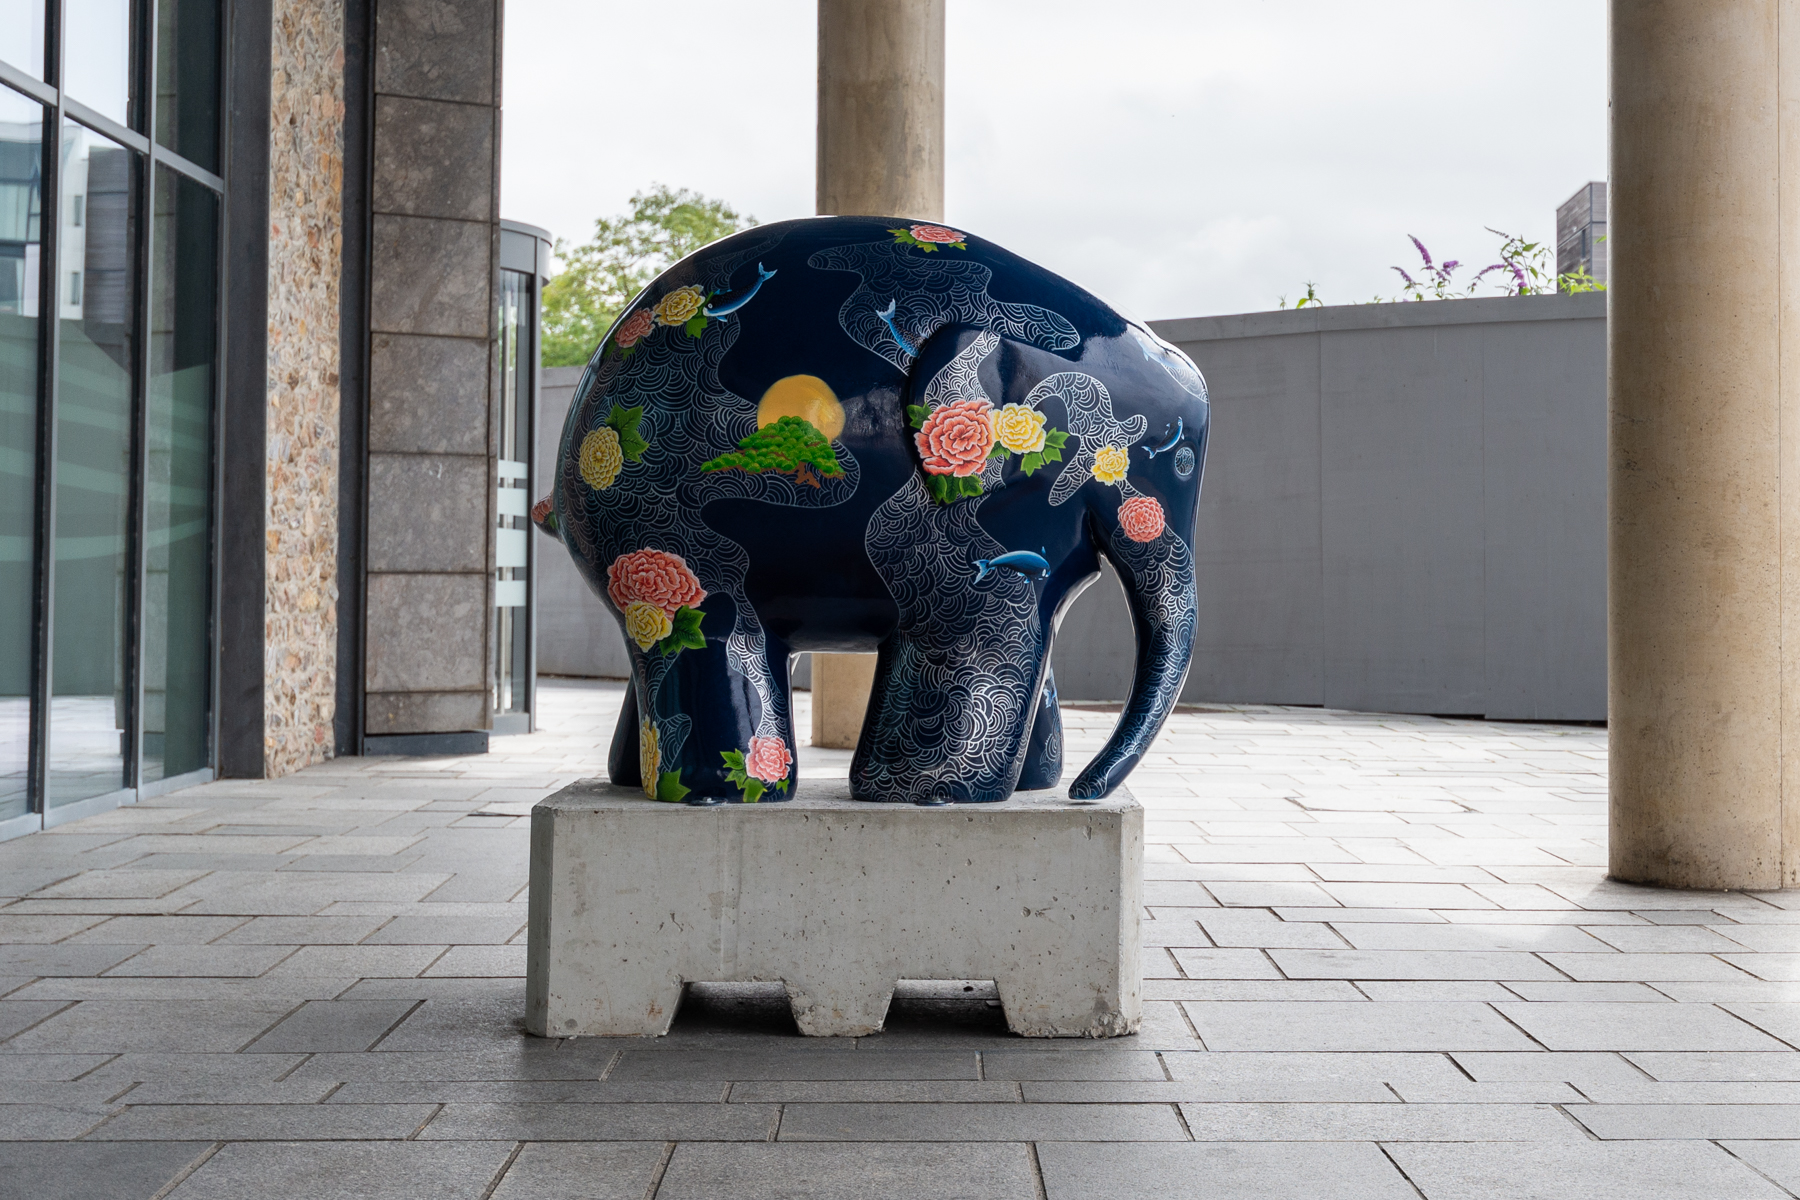 'Zou' by Jess Perrin. Sponsored by Foot Anstey - Image 2 of 16